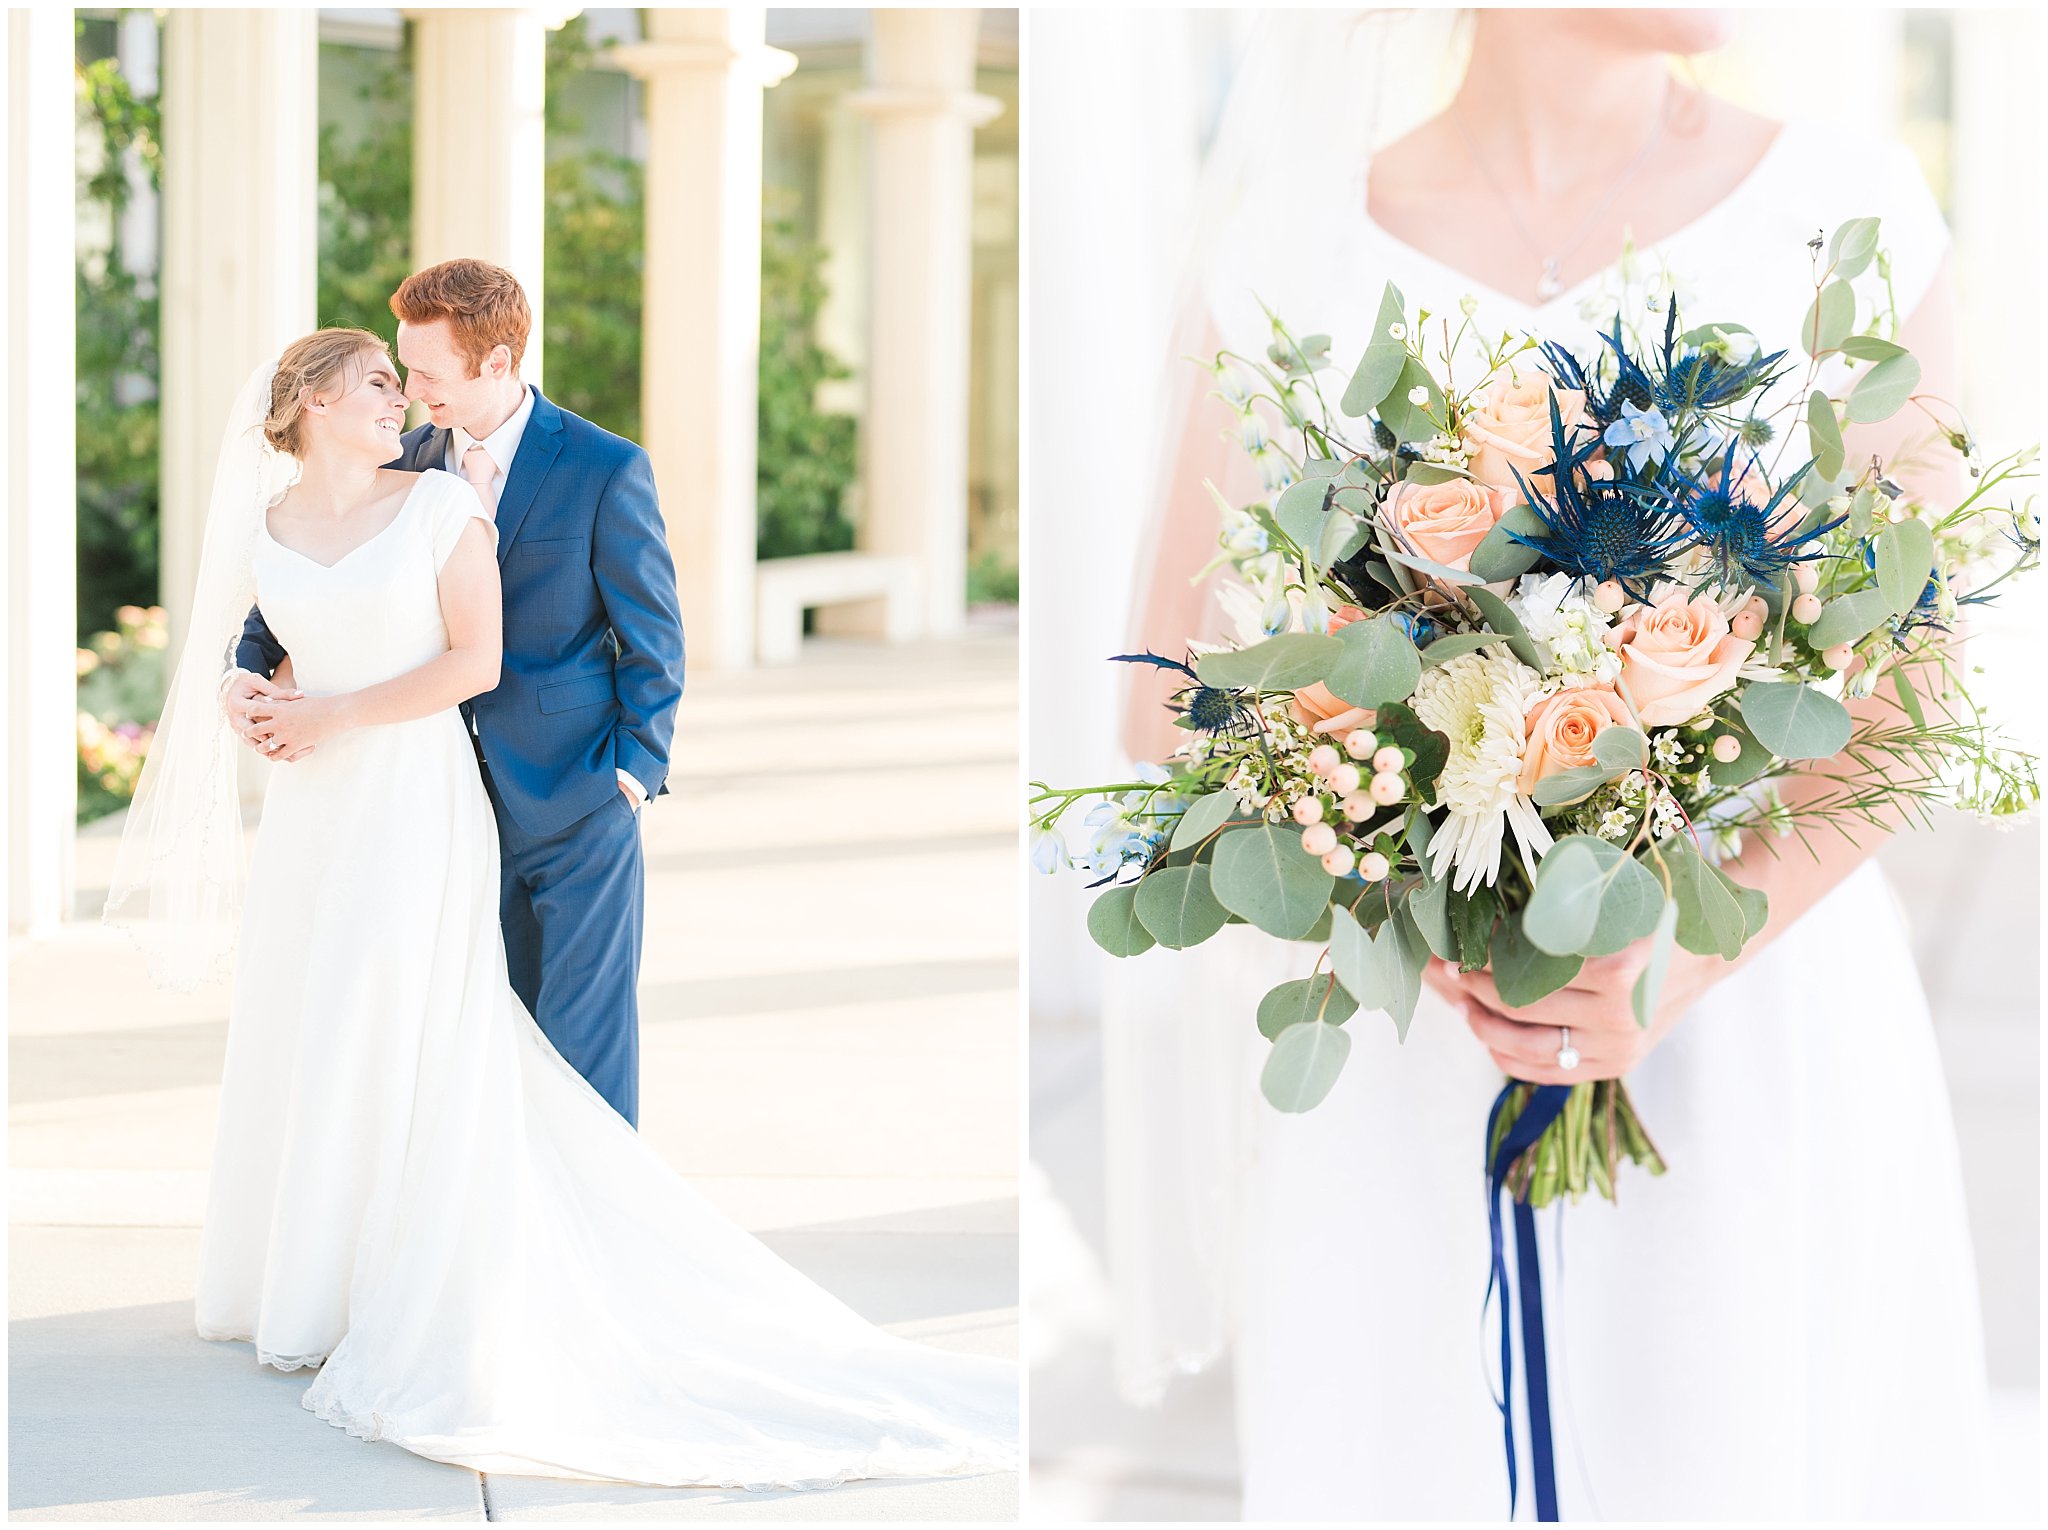 Bride and Groom portraits on wedding day | Bride wearing simple, elegant dress and veil with blue thistle bouquet and groom wearing blue suit and blush tie | Bountiful Temple Wedding and Oak Hills Reception | Jessie and Dallin Photography